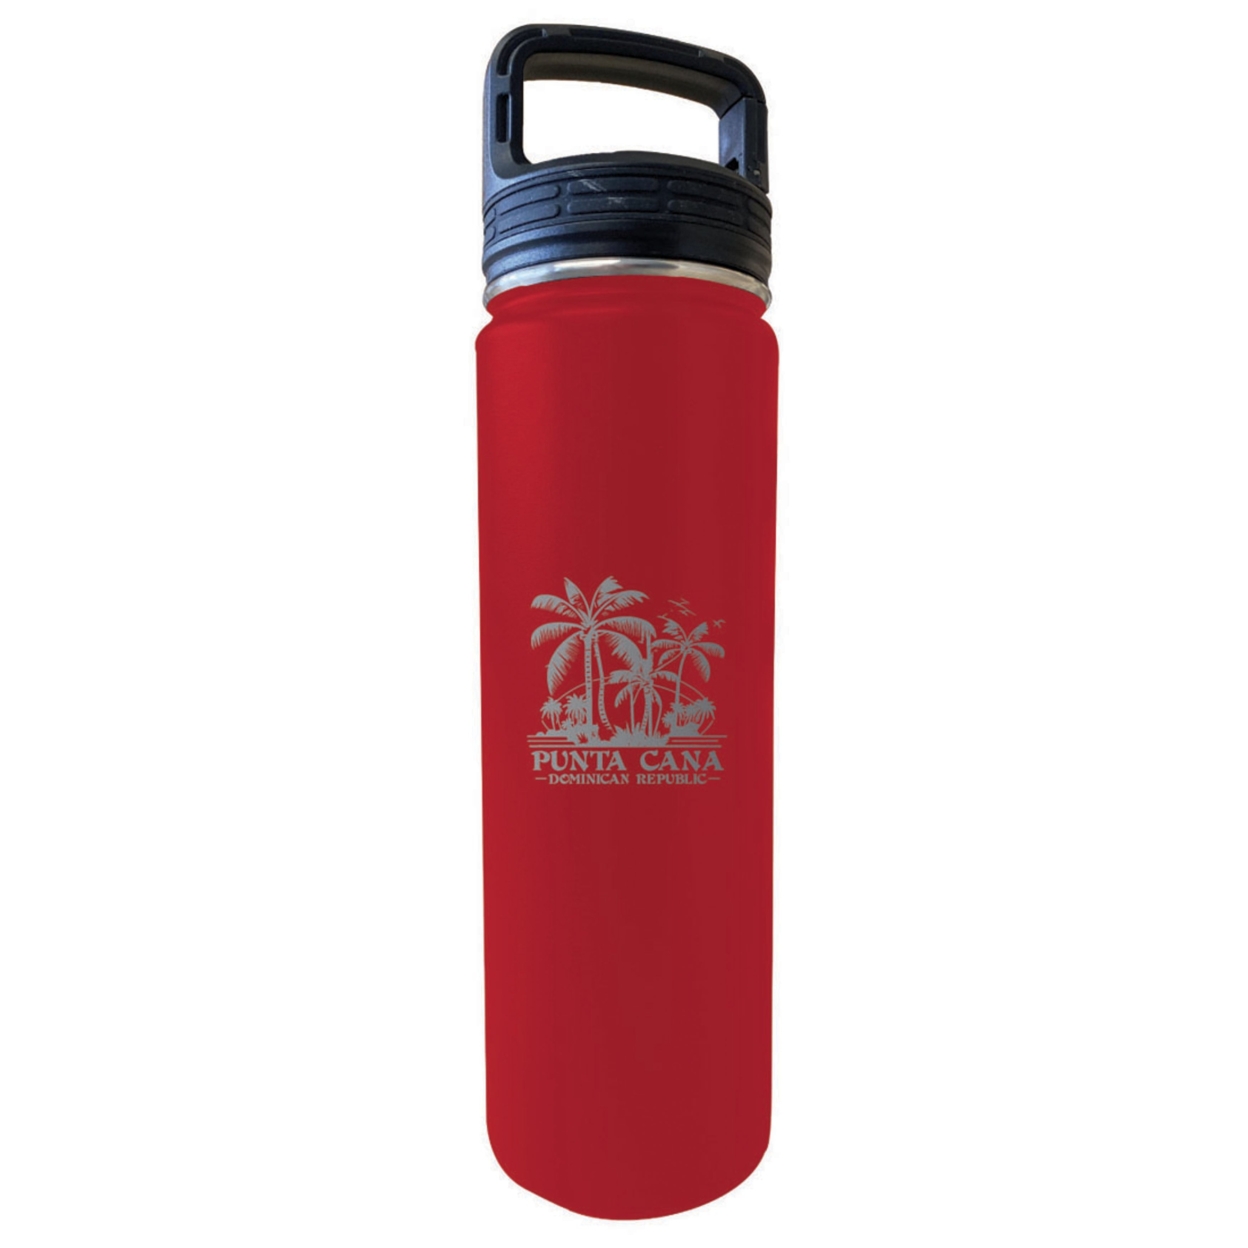 Punta Cana Dominican Republic Souvenir 32 Oz Insulated Stainless Steel Tumbler - White, Palm 3